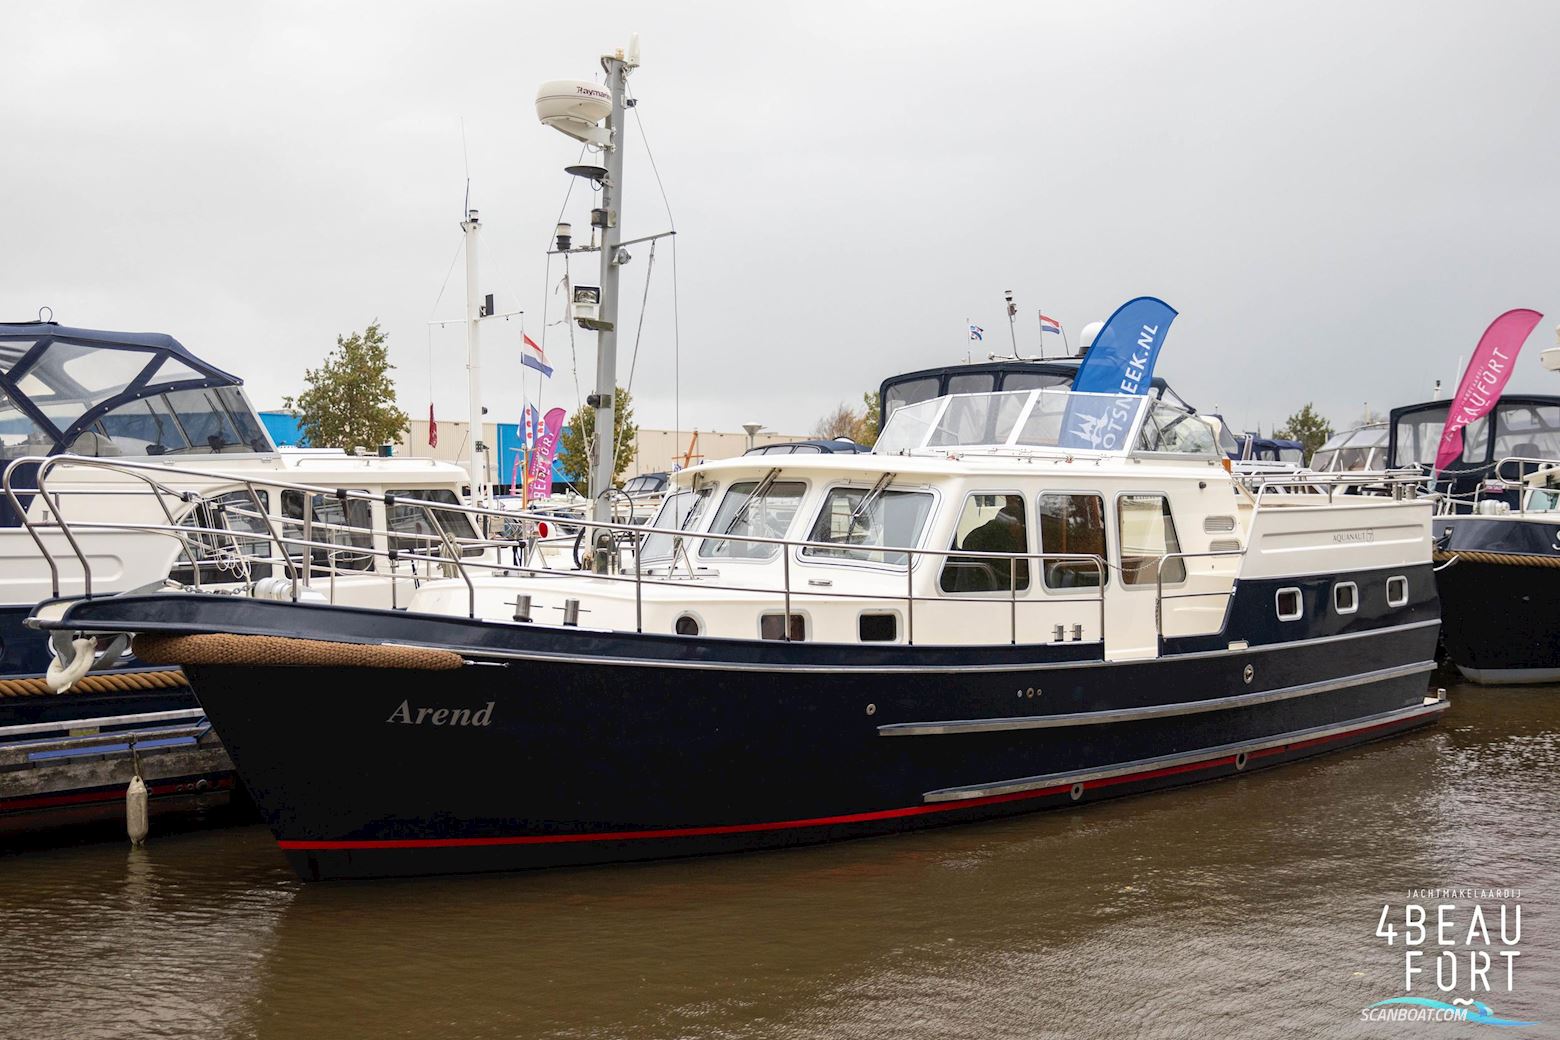 Aquanaut Drifter 1150 AK "Special" Motor boat 2004, with Perkins engine, The Netherlands